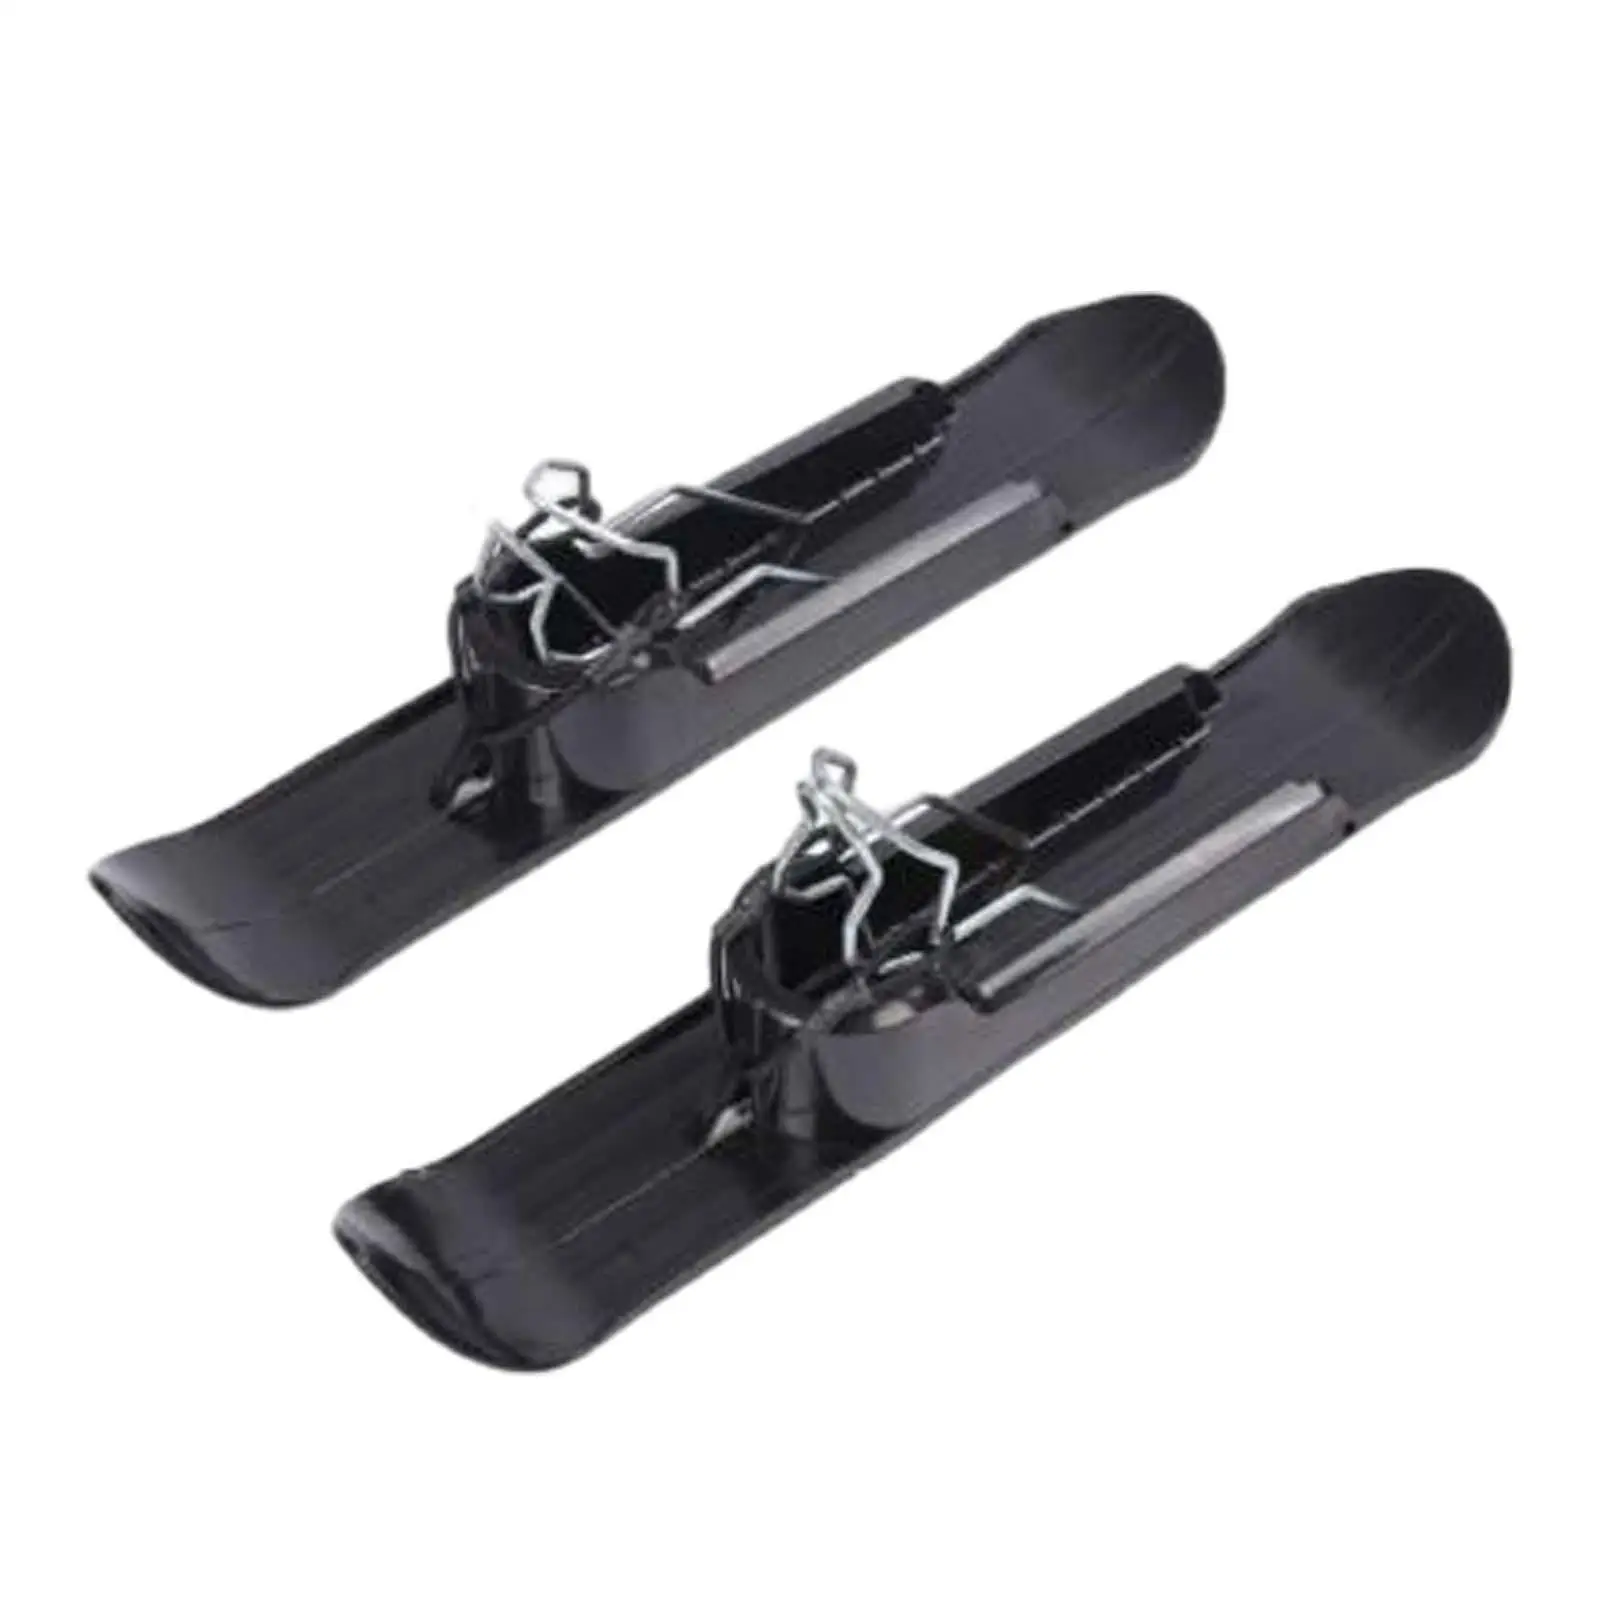 Snow Sledge Board Ski Plate for Scooter Disabled Wheelchair Balancing Bike